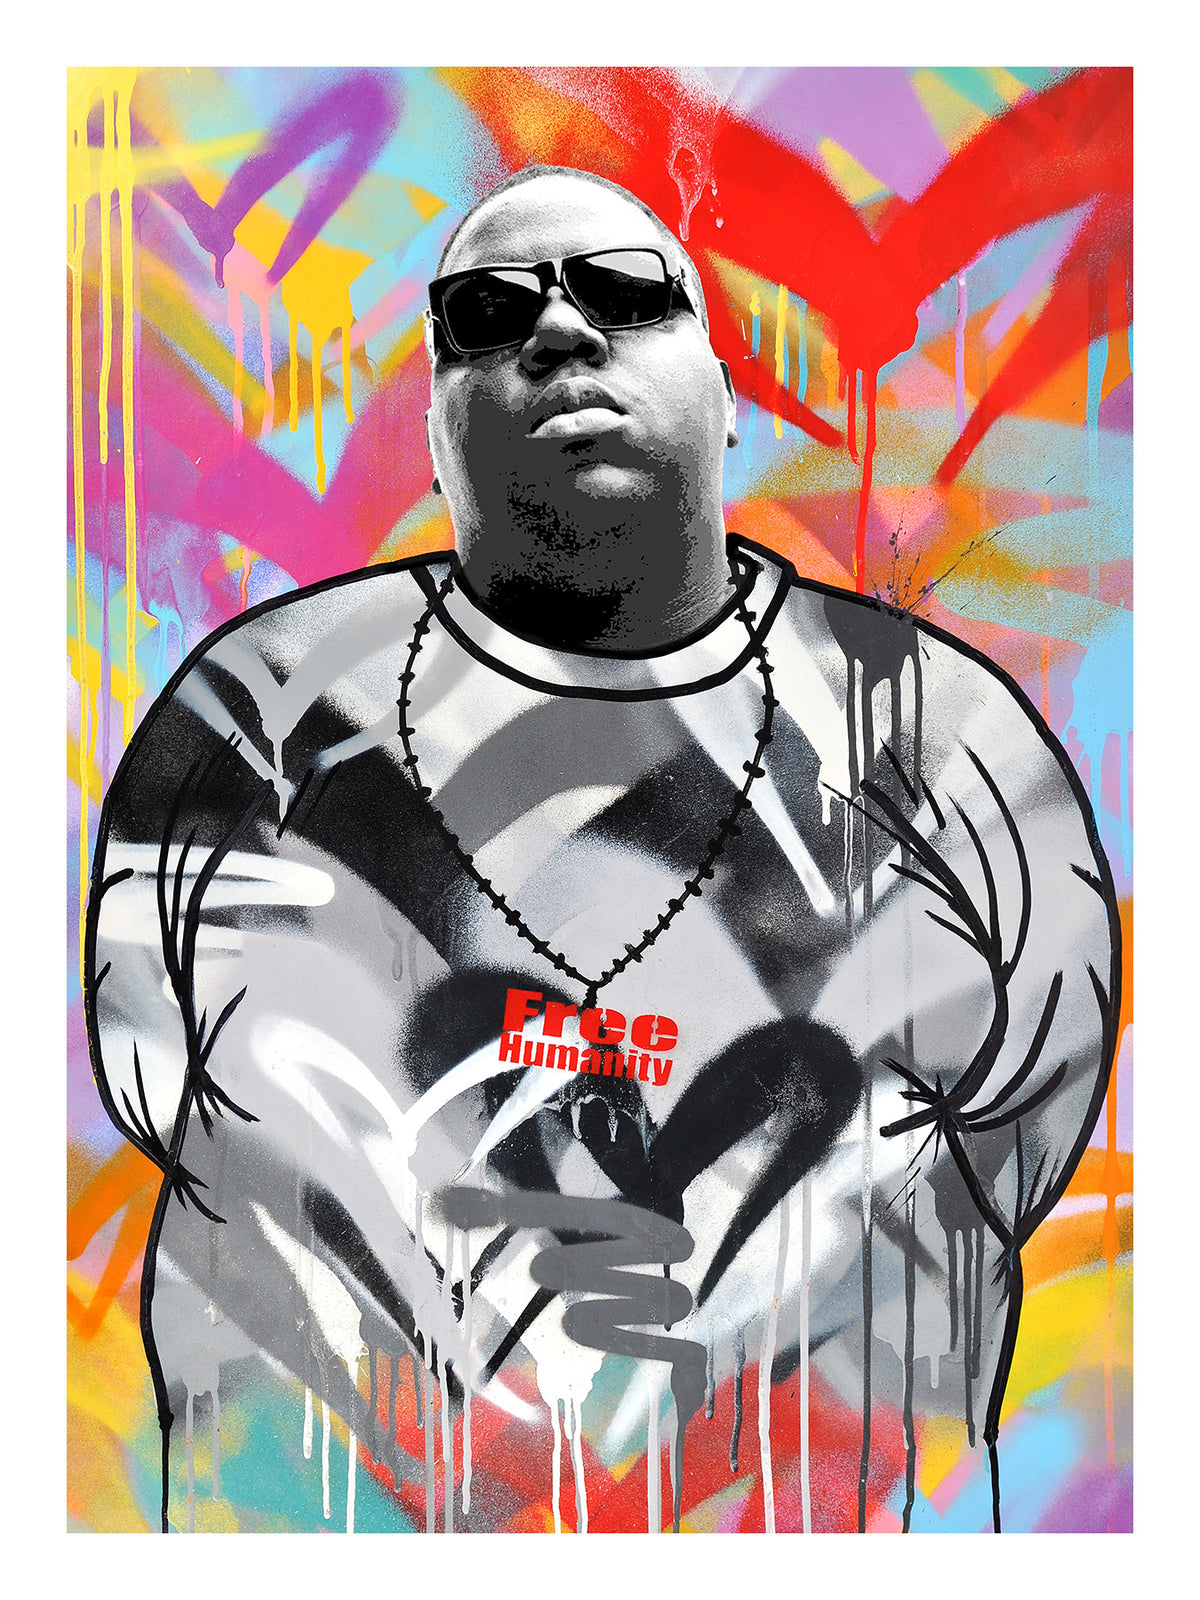 Free Humanity &quot;Notorious B.I.G.&quot; - 2 x Vinyl Stickers